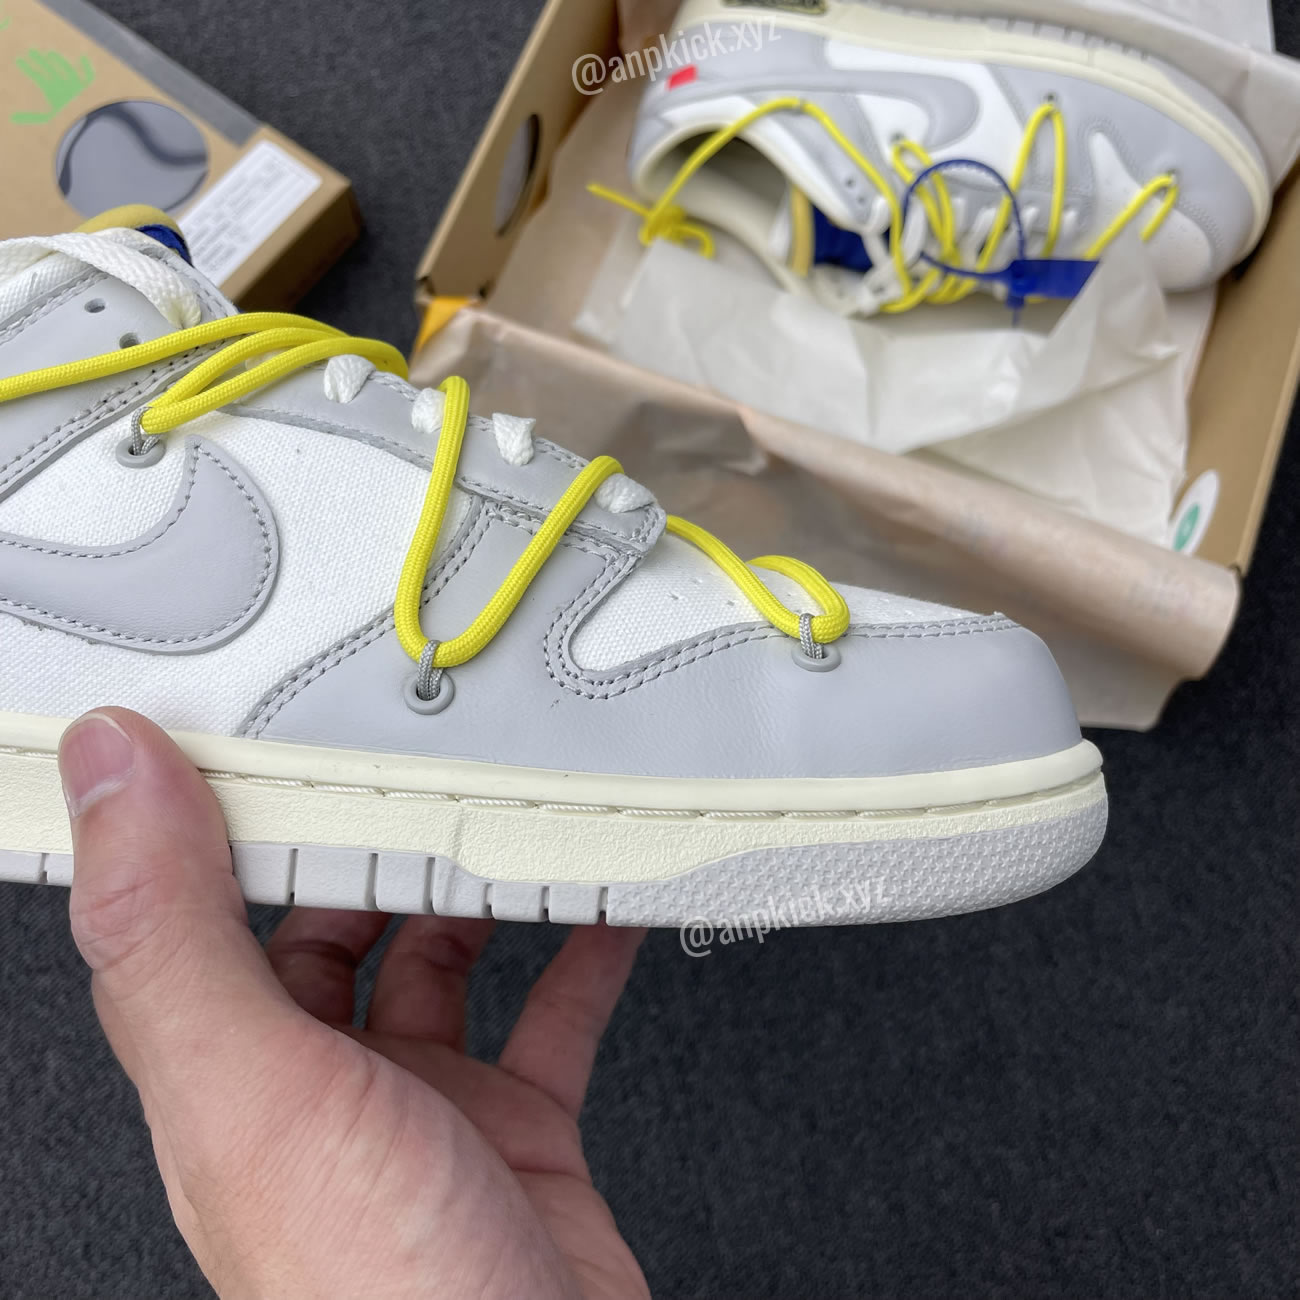 Off White Nike Sb Dunk Low The 27 Of 50 Sail Neutral Grey Dm1602 120 (4) - newkick.org